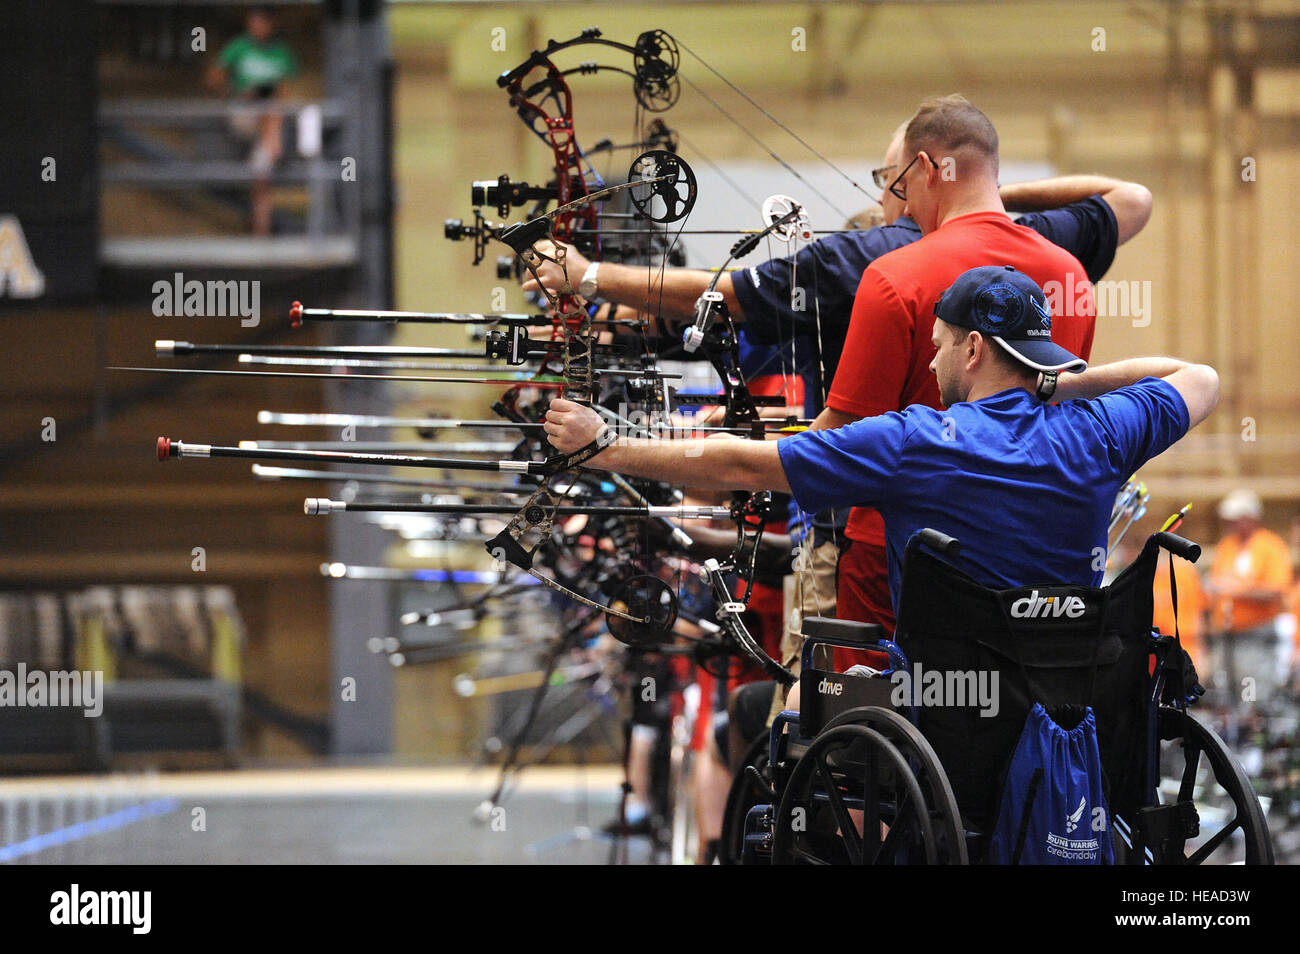 U.S. Air Force Retired Tech. Sgt.  Brian Schaaf from Oxford, England, releases an arrow during the archery competition at the 2016 DoD Warrior Games held at U.S. Military Academy at West Point, N.Y., June 17, 2016. The DoD Warrior Games, June 15-21, is an adaptive sports competition for wounded, ill and injured service members and Veterans. Athletes representing teams from the Army, Marine Corps, Navy, Air Force, Special Operations Command and the United Kingdom Armed Forces compete in archery, cycling, track and field, shooting, sitting volleyball, swimming, and wheelchair basketball. ( Tech. Stock Photo